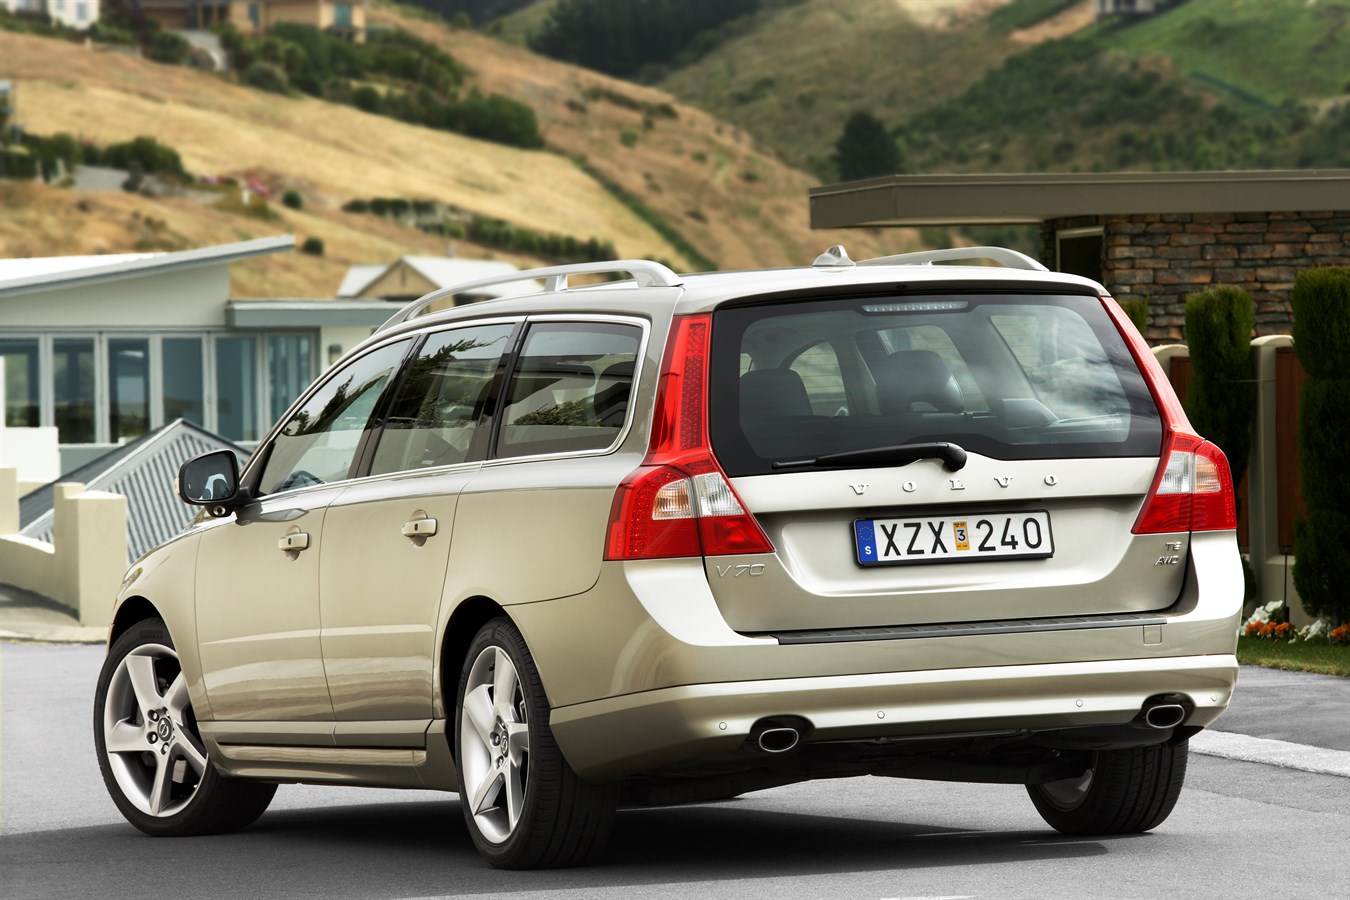 The all-new Volvo V70 - still number one in the estate car segment